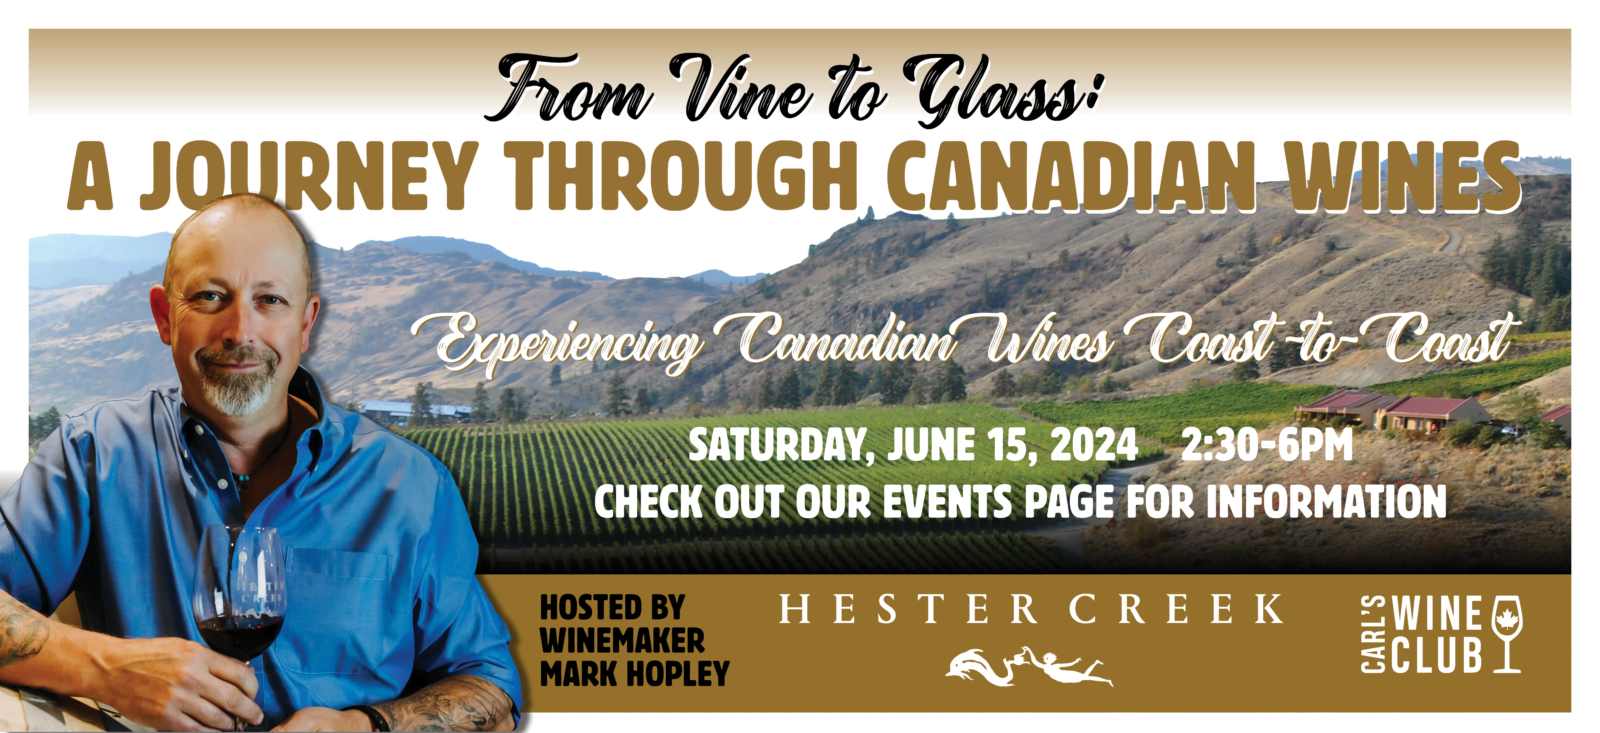 Banner ad for Pan Canadian Wine Tasting featuring Winemaker, Mark Hopley, and a background image of the Hester Creek vineyard